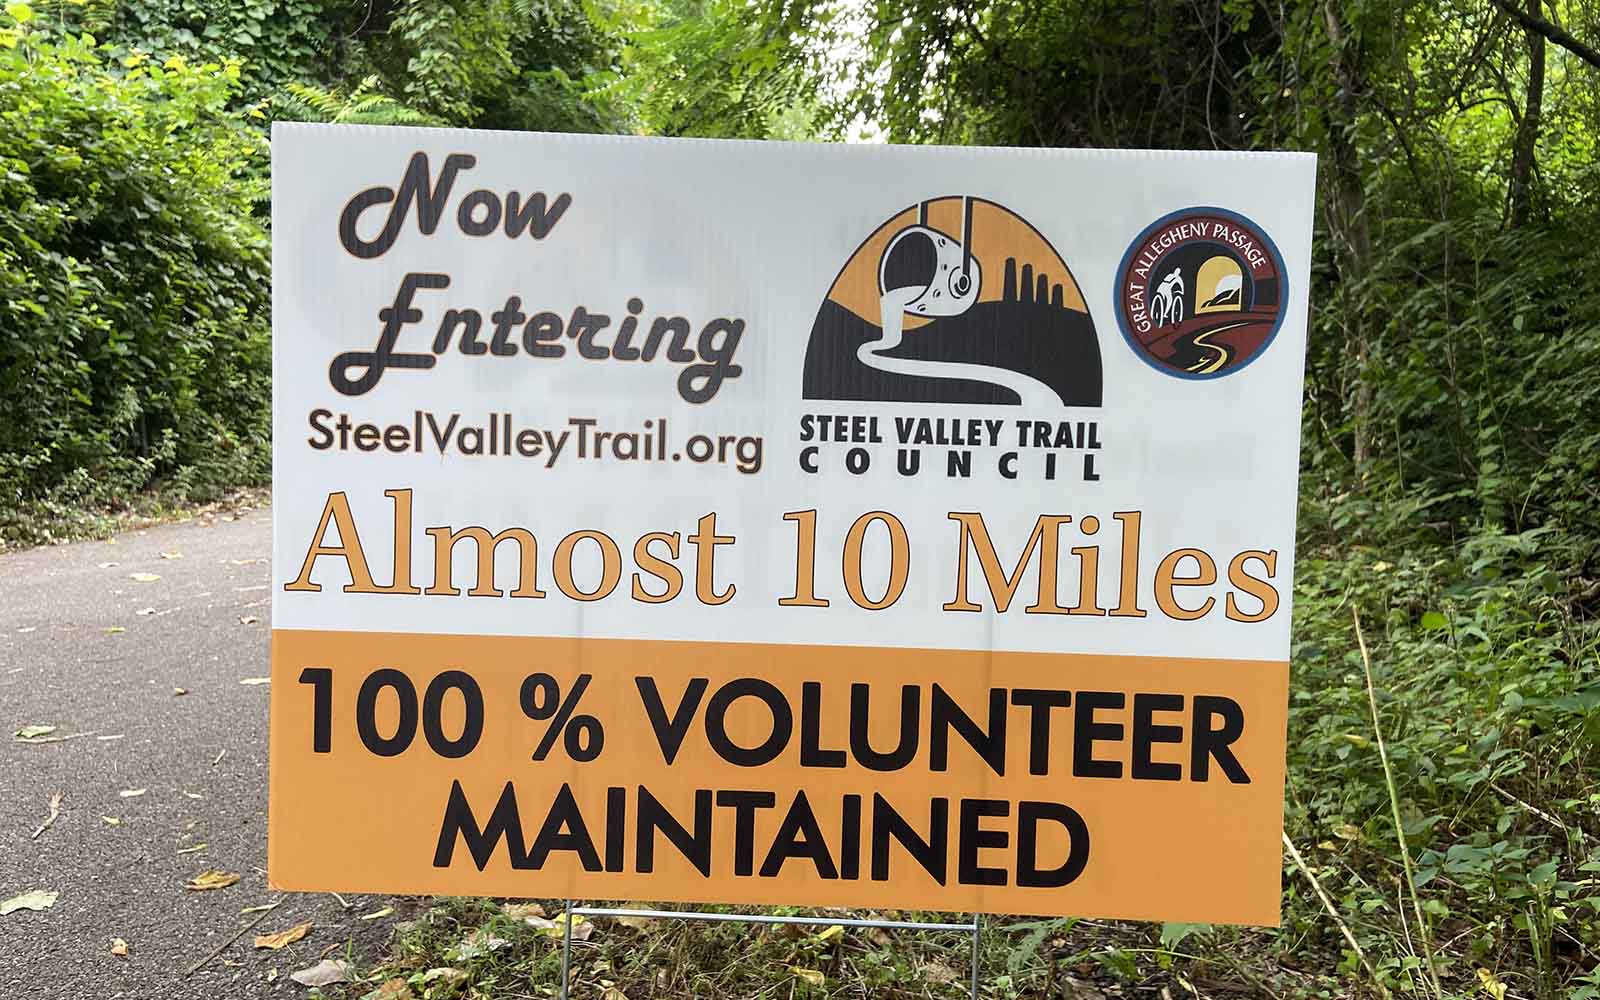 A sign along a trail reads "Now entering Steel Valley Trail dot org, almost 10 miles, 100% volunteer maintained"